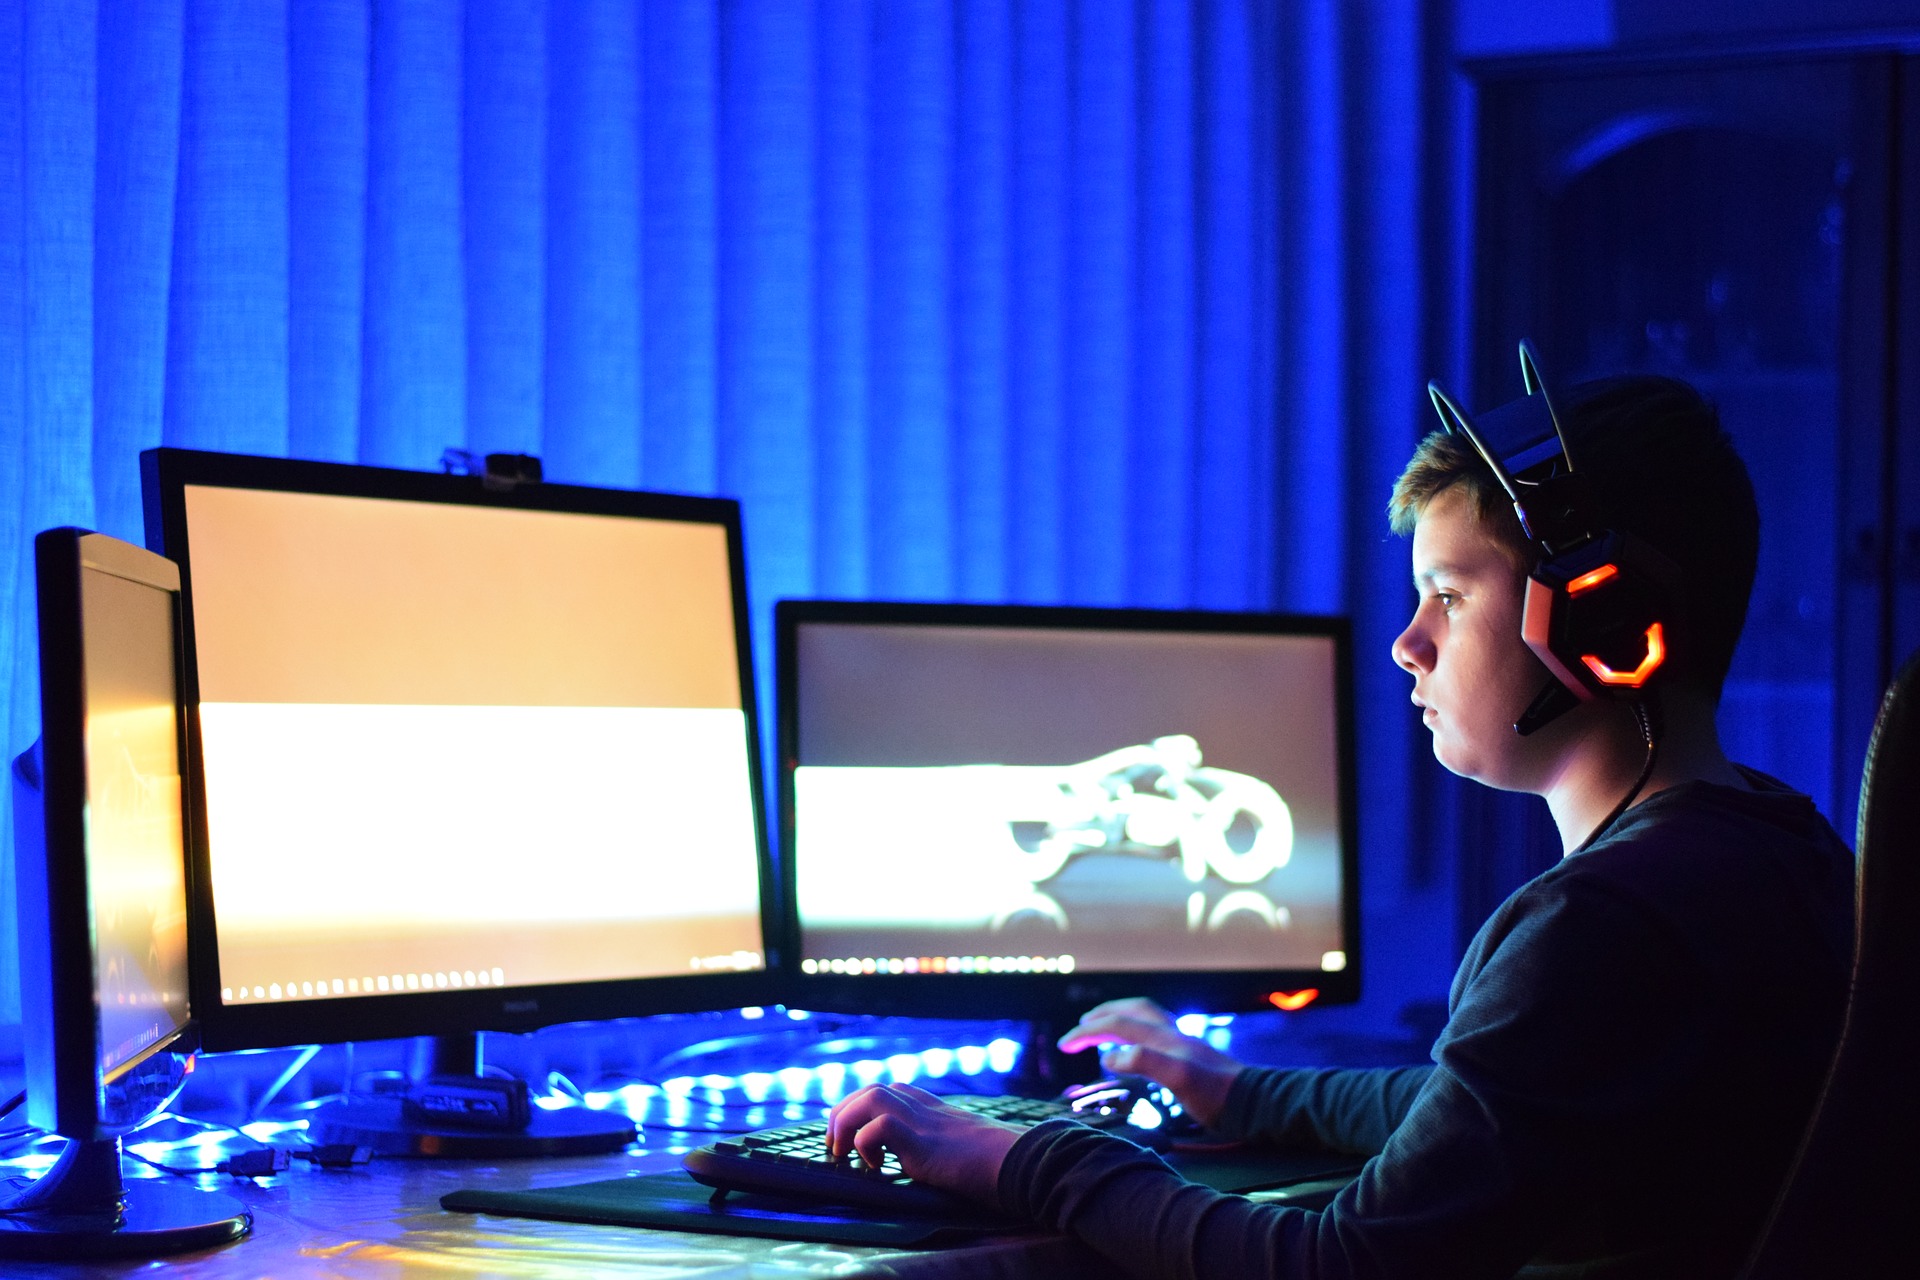 Online gaming industry upbeat amid COVID spread